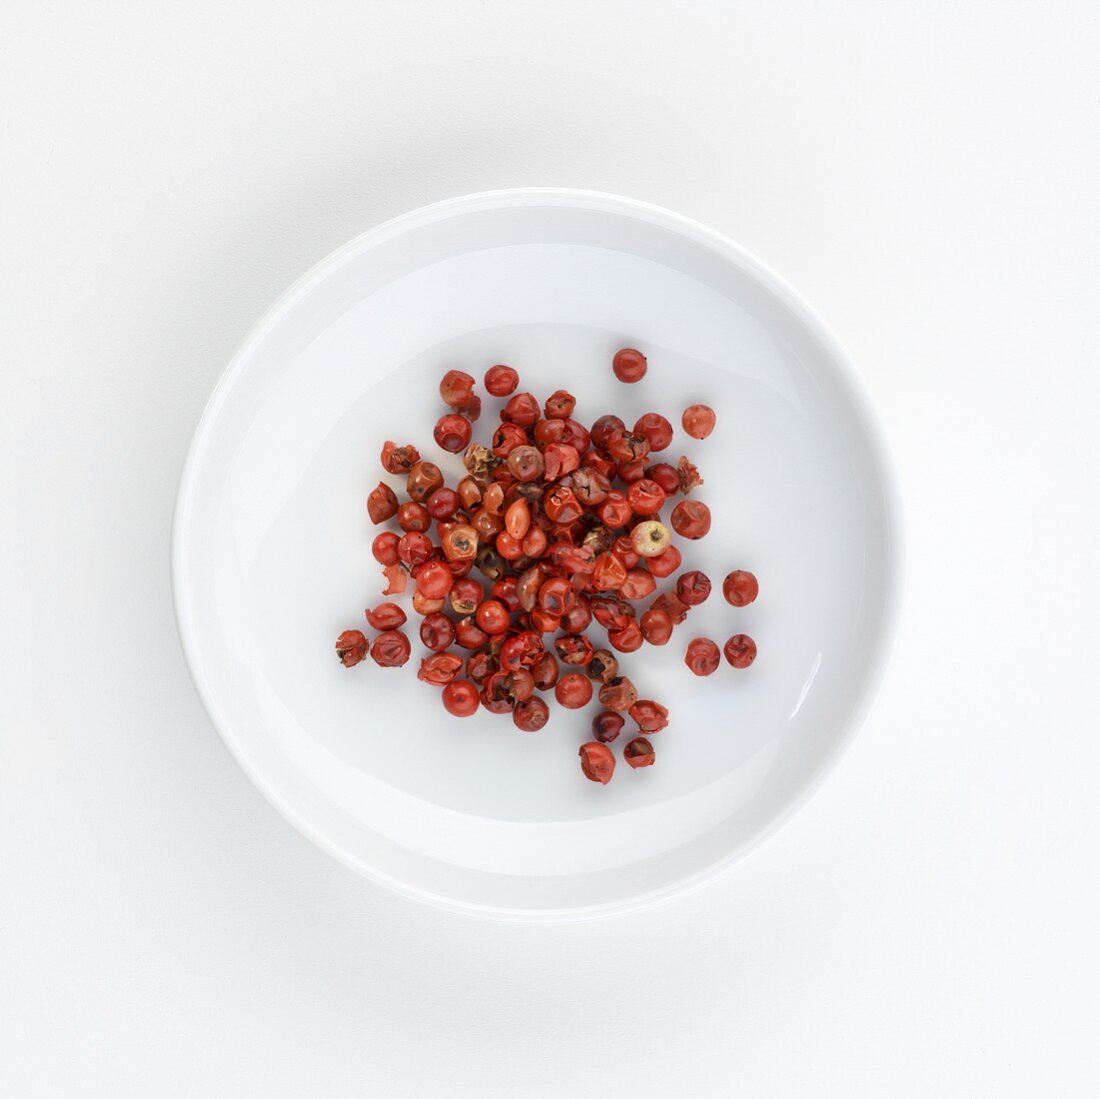 A plate of pink pepper, seen from above